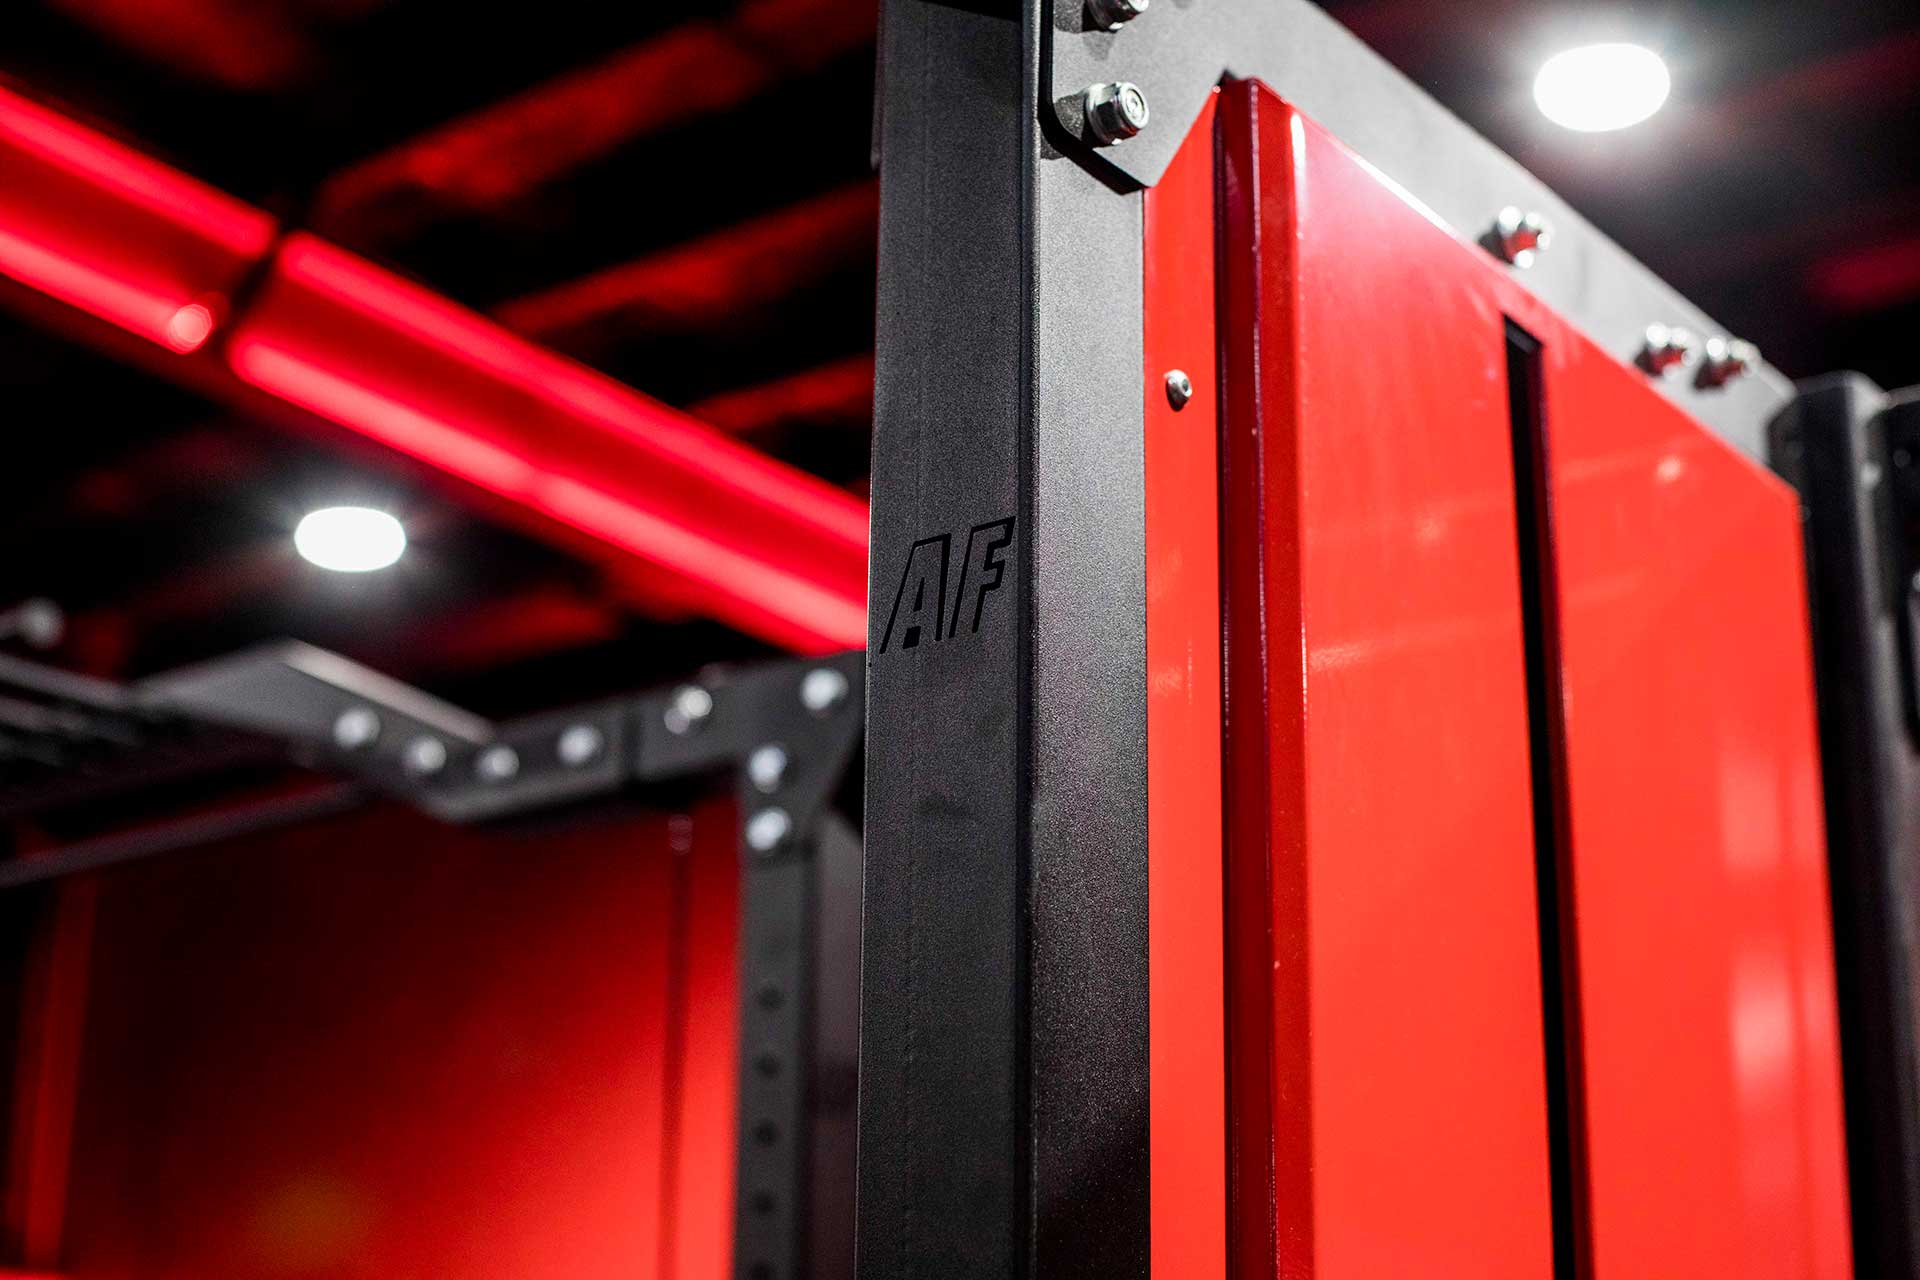 Alphafit Custom Rigs and Cages